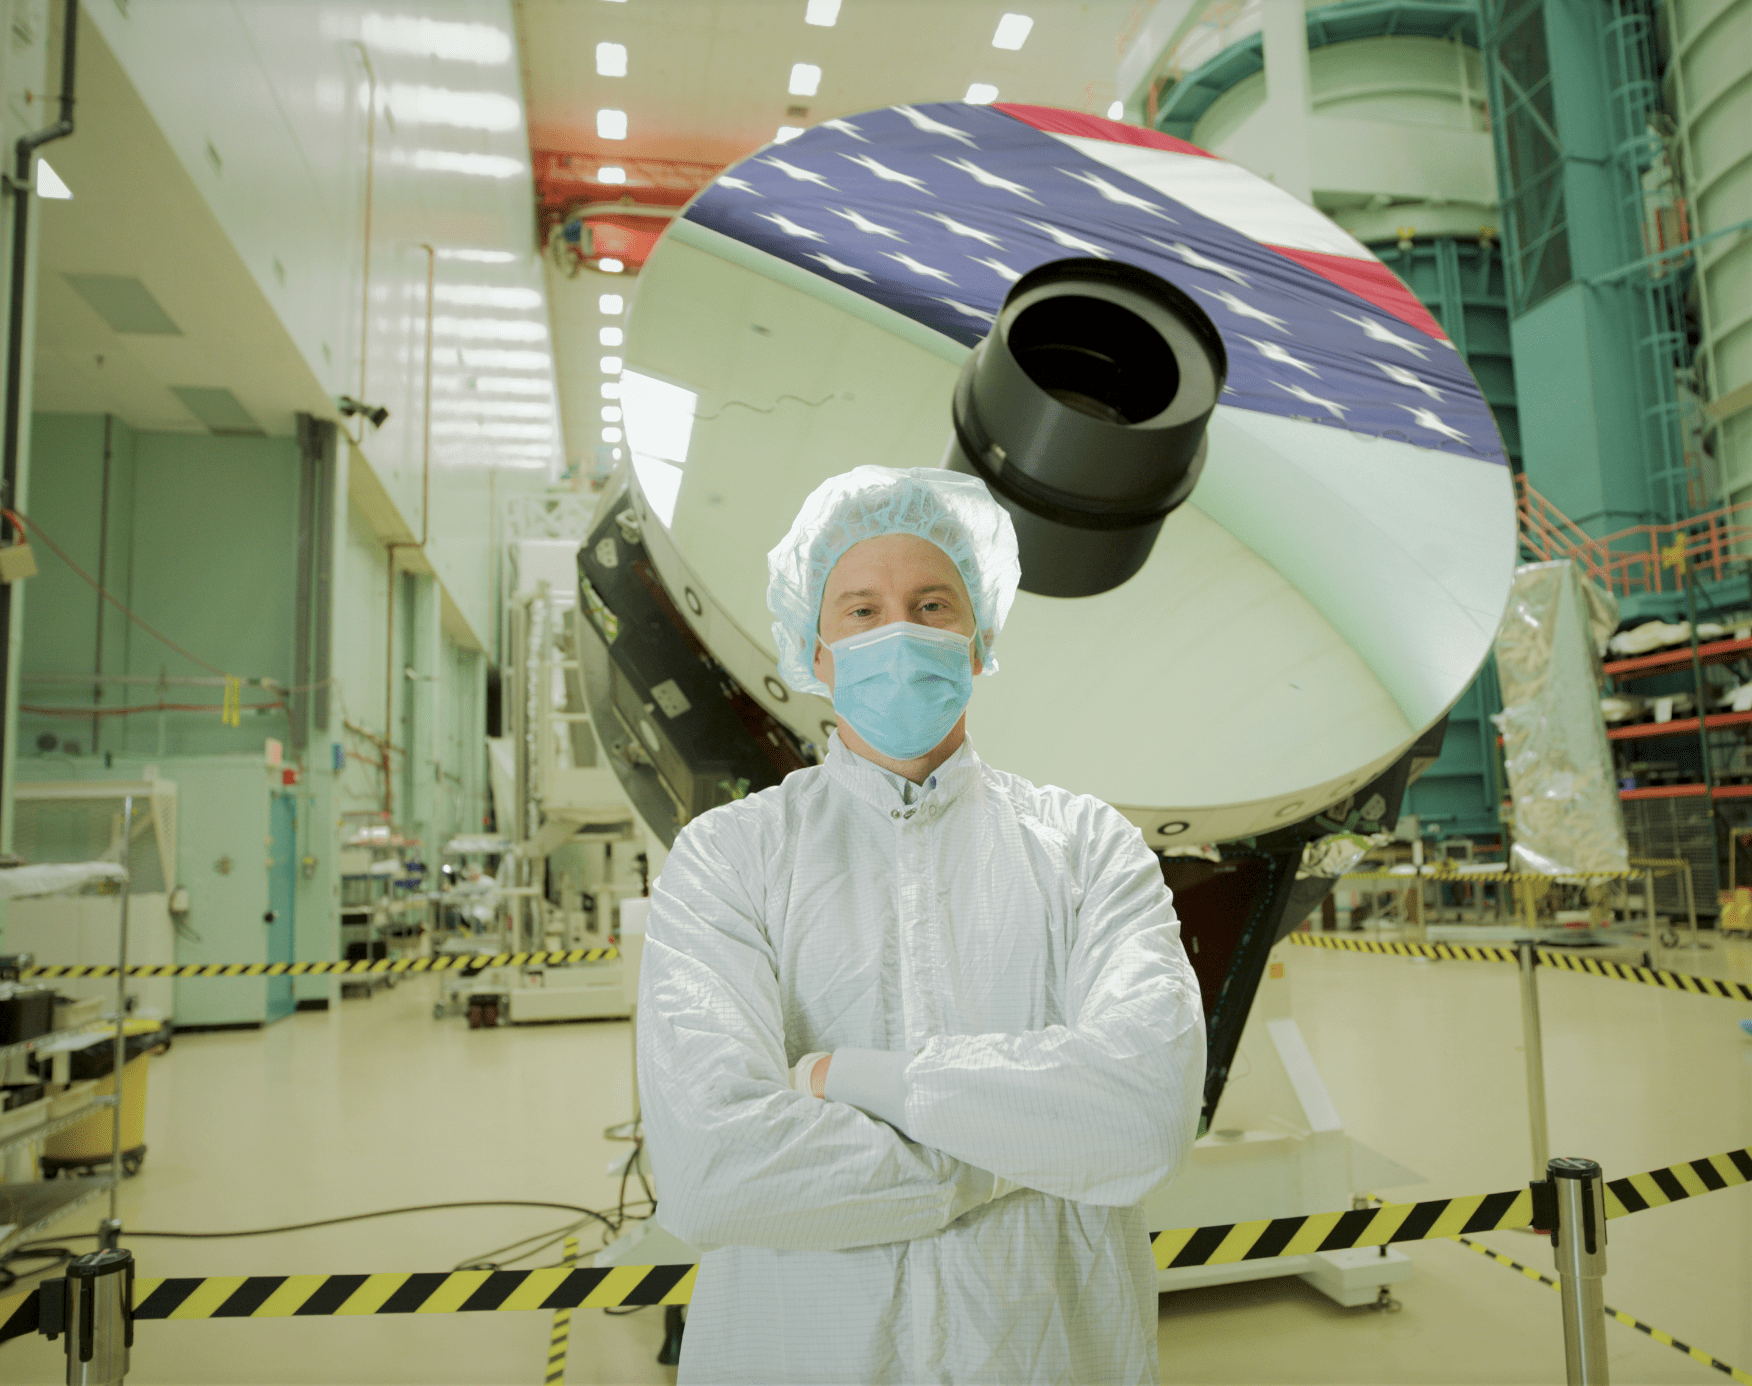 Joshua Abel, a man wearing white coveralls, a light blue hair net, and a light blue face mask, stands and poses with arms crossed in front of the Nancy Grace Roman Space Telescope's primary mirror. The mirror is shaped like a large silver disk, reflecting part of an American flag in its upper surface. Both Joshua and the mirror are inside a clean room, with pipes, shelves, stairs, and storage lining the walls, most in shades of light turquoise. Black and yellow caution tape forms a barrier around the telescope mirror.